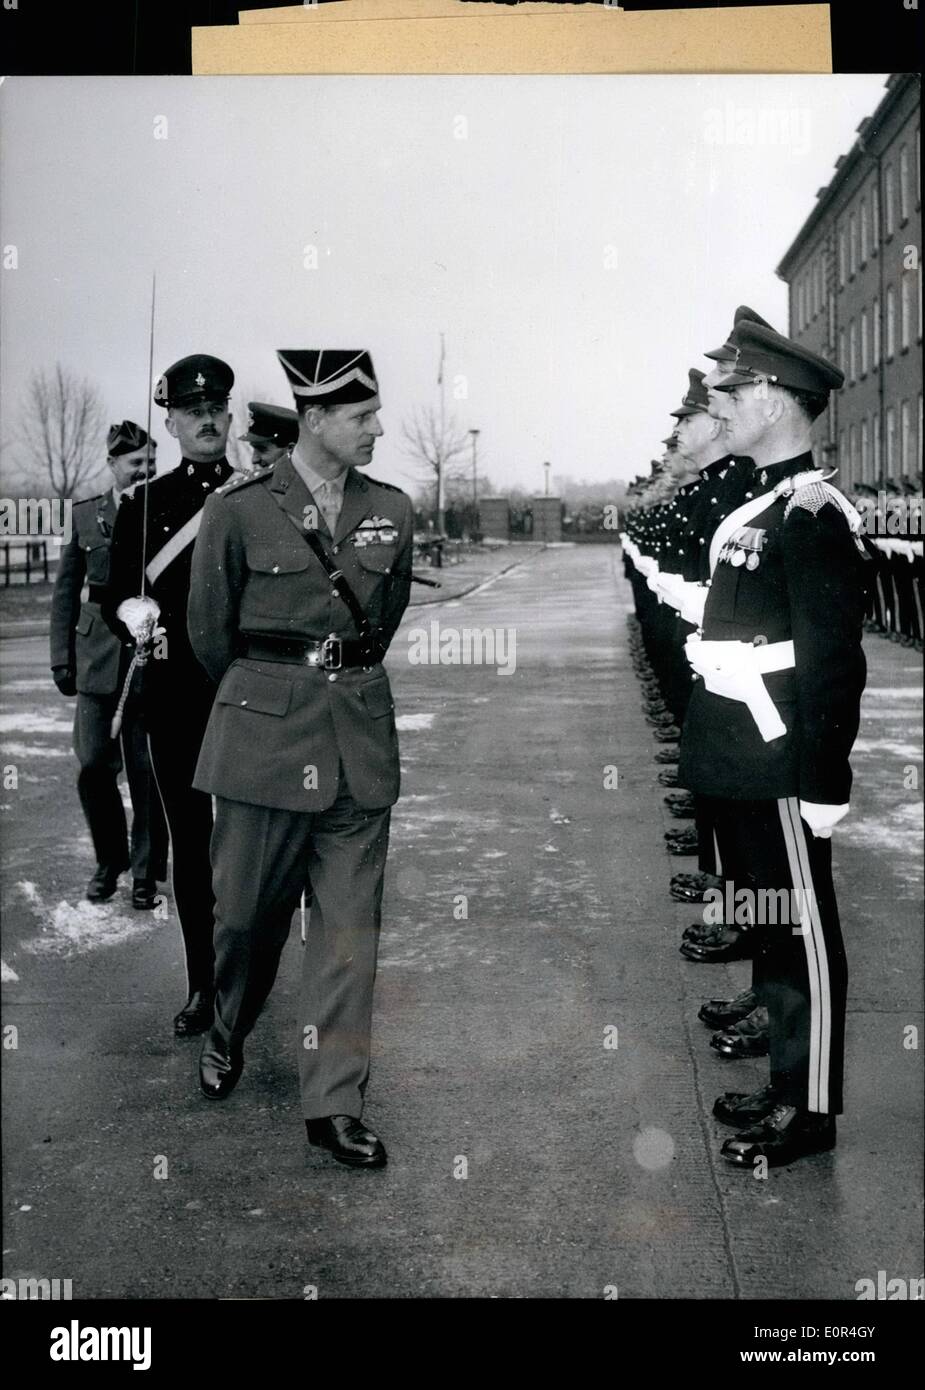 Mar. 03, 1958 - Prince Philip Visiting The 8th Irish Hussar Regimen: As chief of this regiment, His Royal Highness Prince Philip (Philip) at March 10, 1958 privately was visiting the 8th Irish Hussar regiment in the Wyvern barracks in Lineburg. He also was looking at the drilling districts of tanks. Photo Shows Prince Philip walking along the honour company. Stock Photo